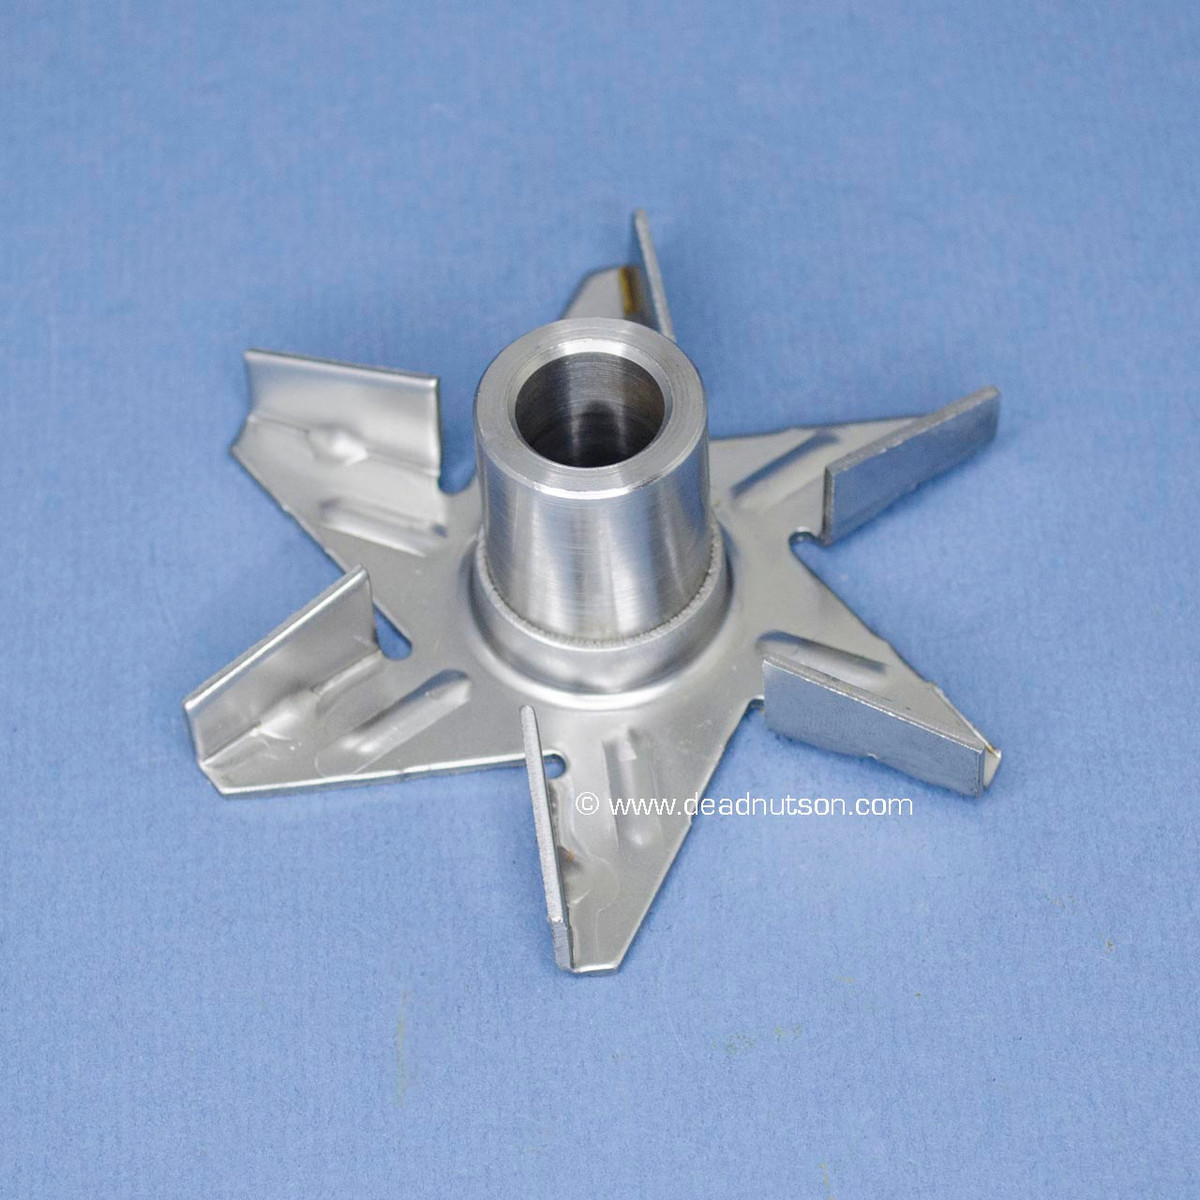 Ford 289, 302 Water Pump Impeller - Dead Nuts On